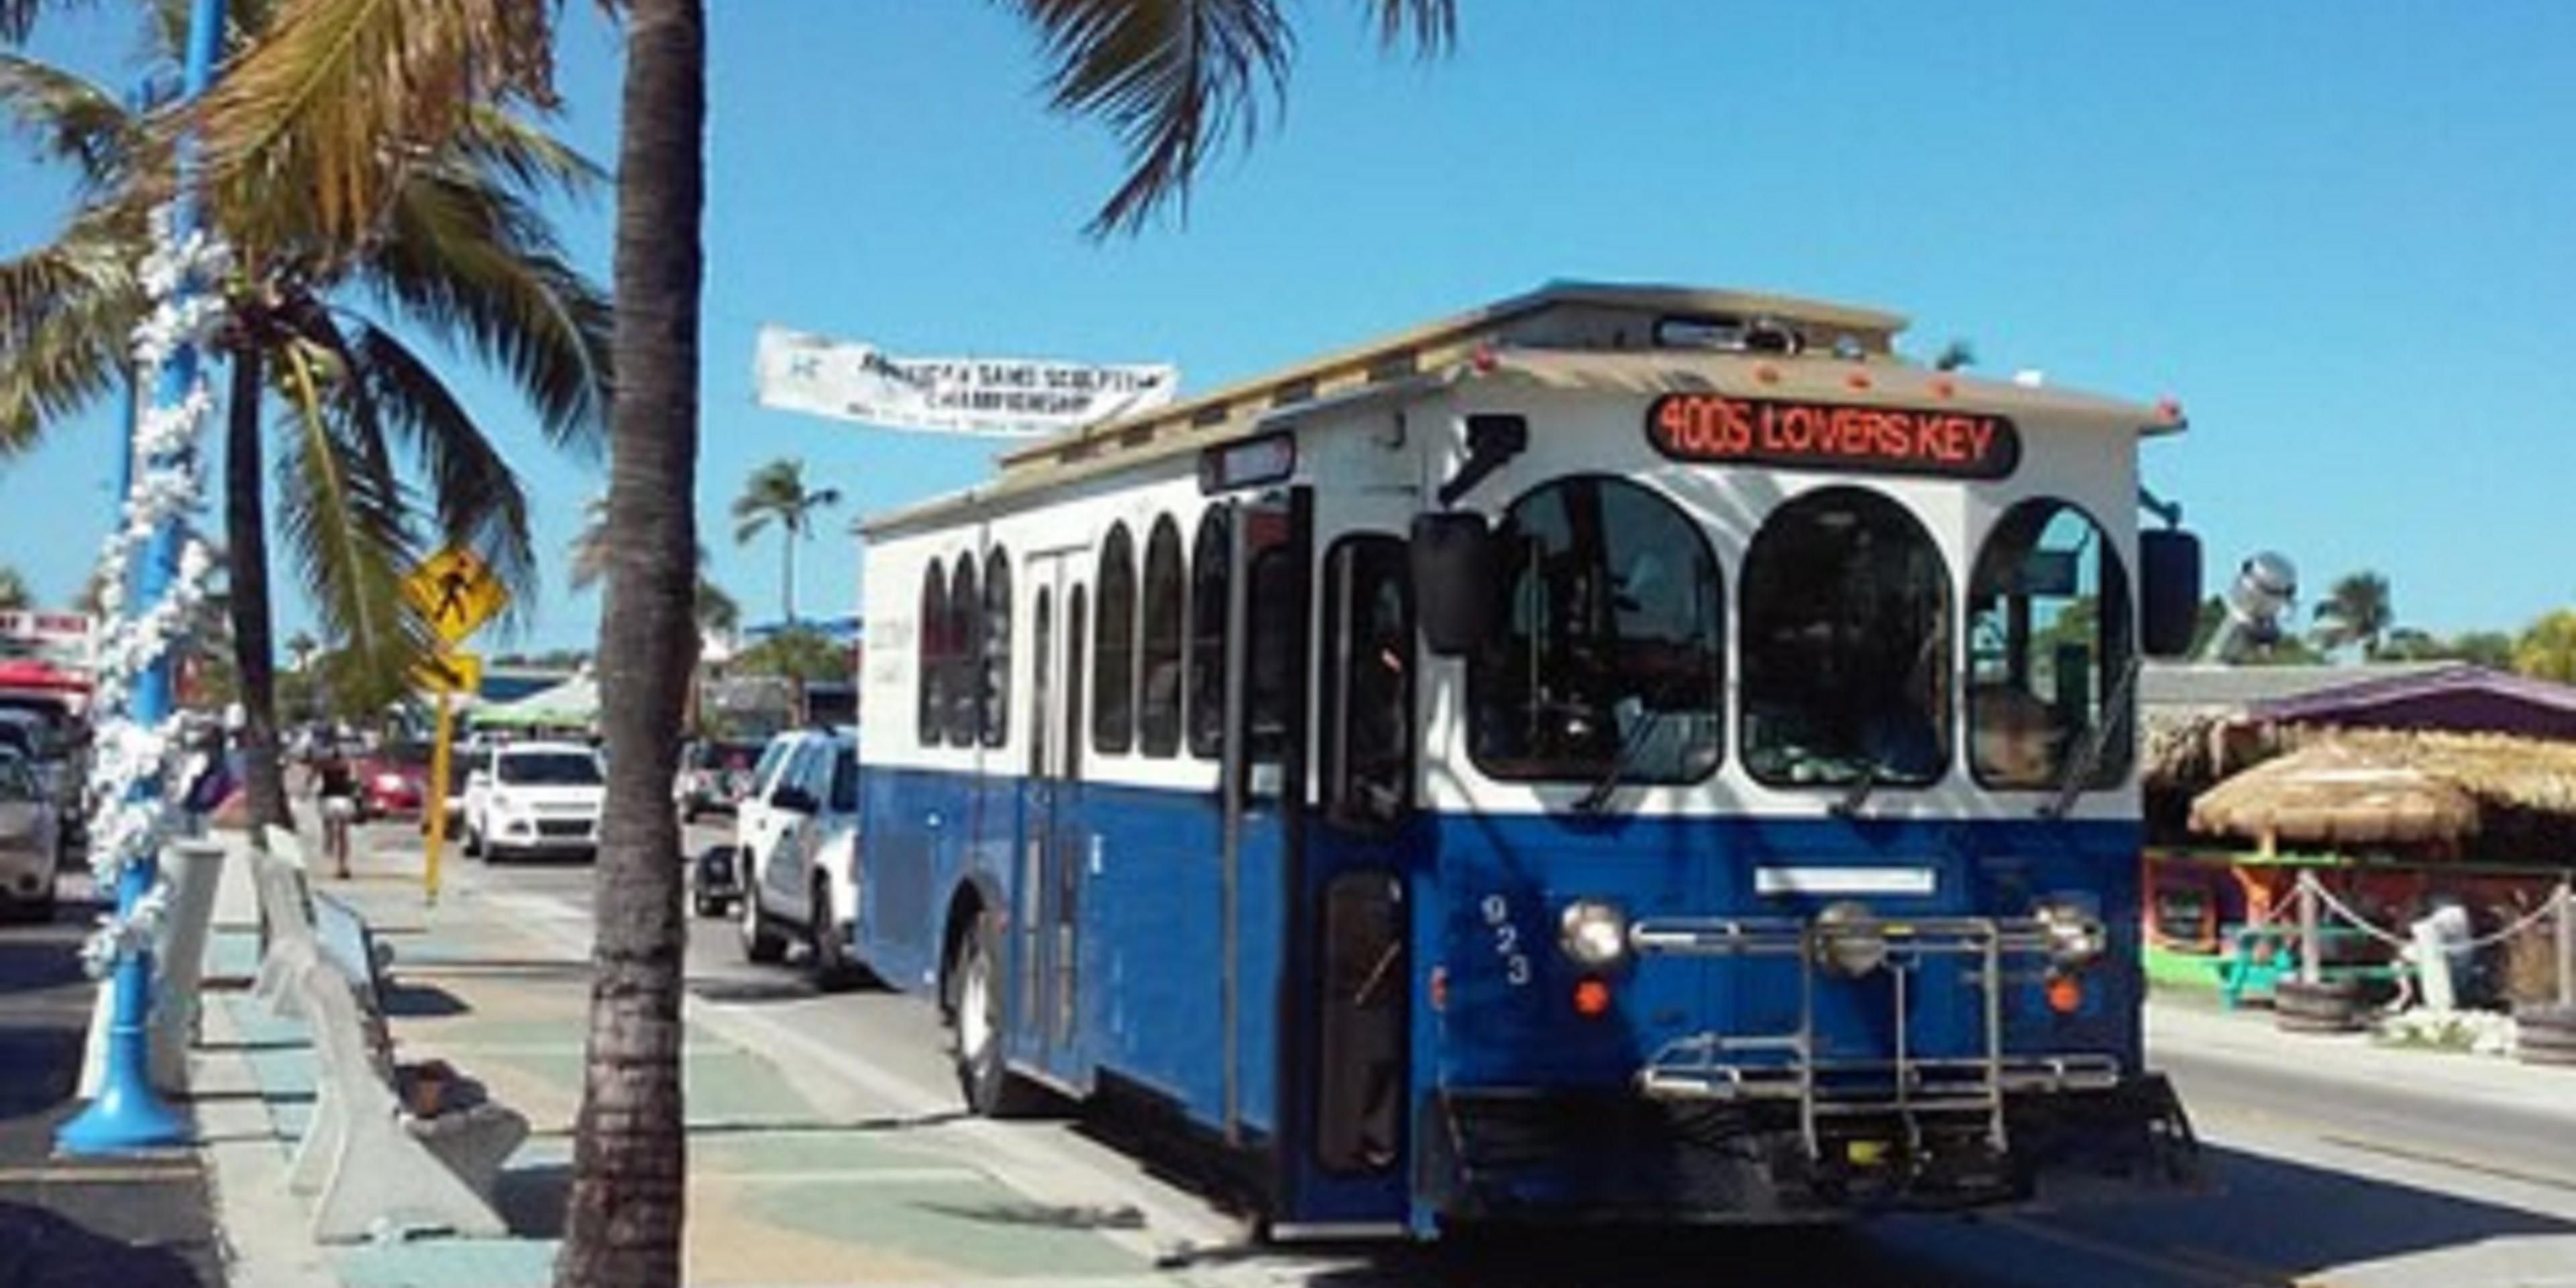 Hop on the Lee Tran Trolley and ride to Fort Myers Beach for less than a dollar.